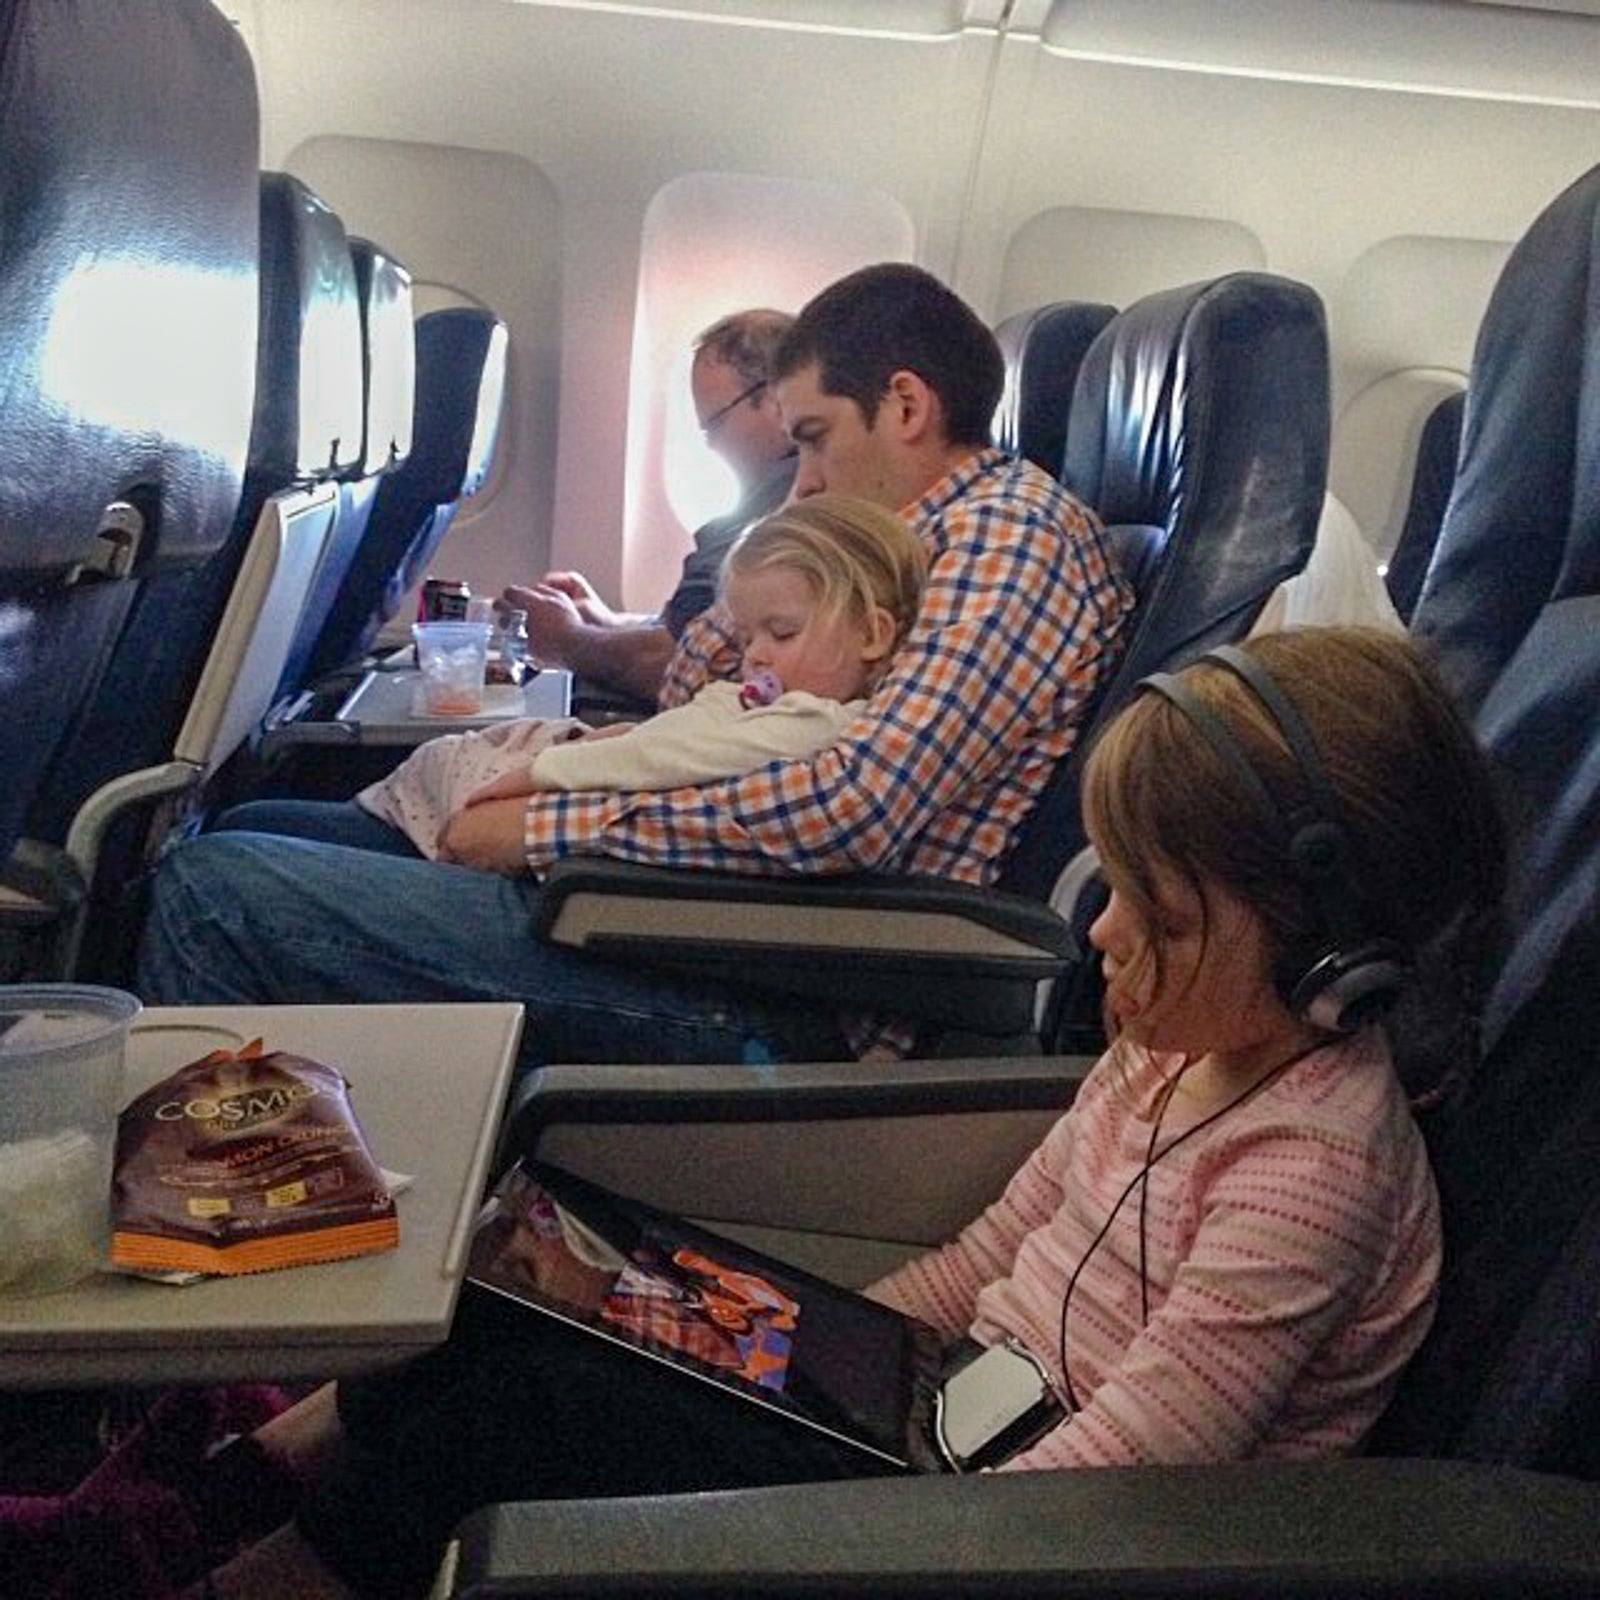 Traveling on an airplane with a toddler can be quite a challenge